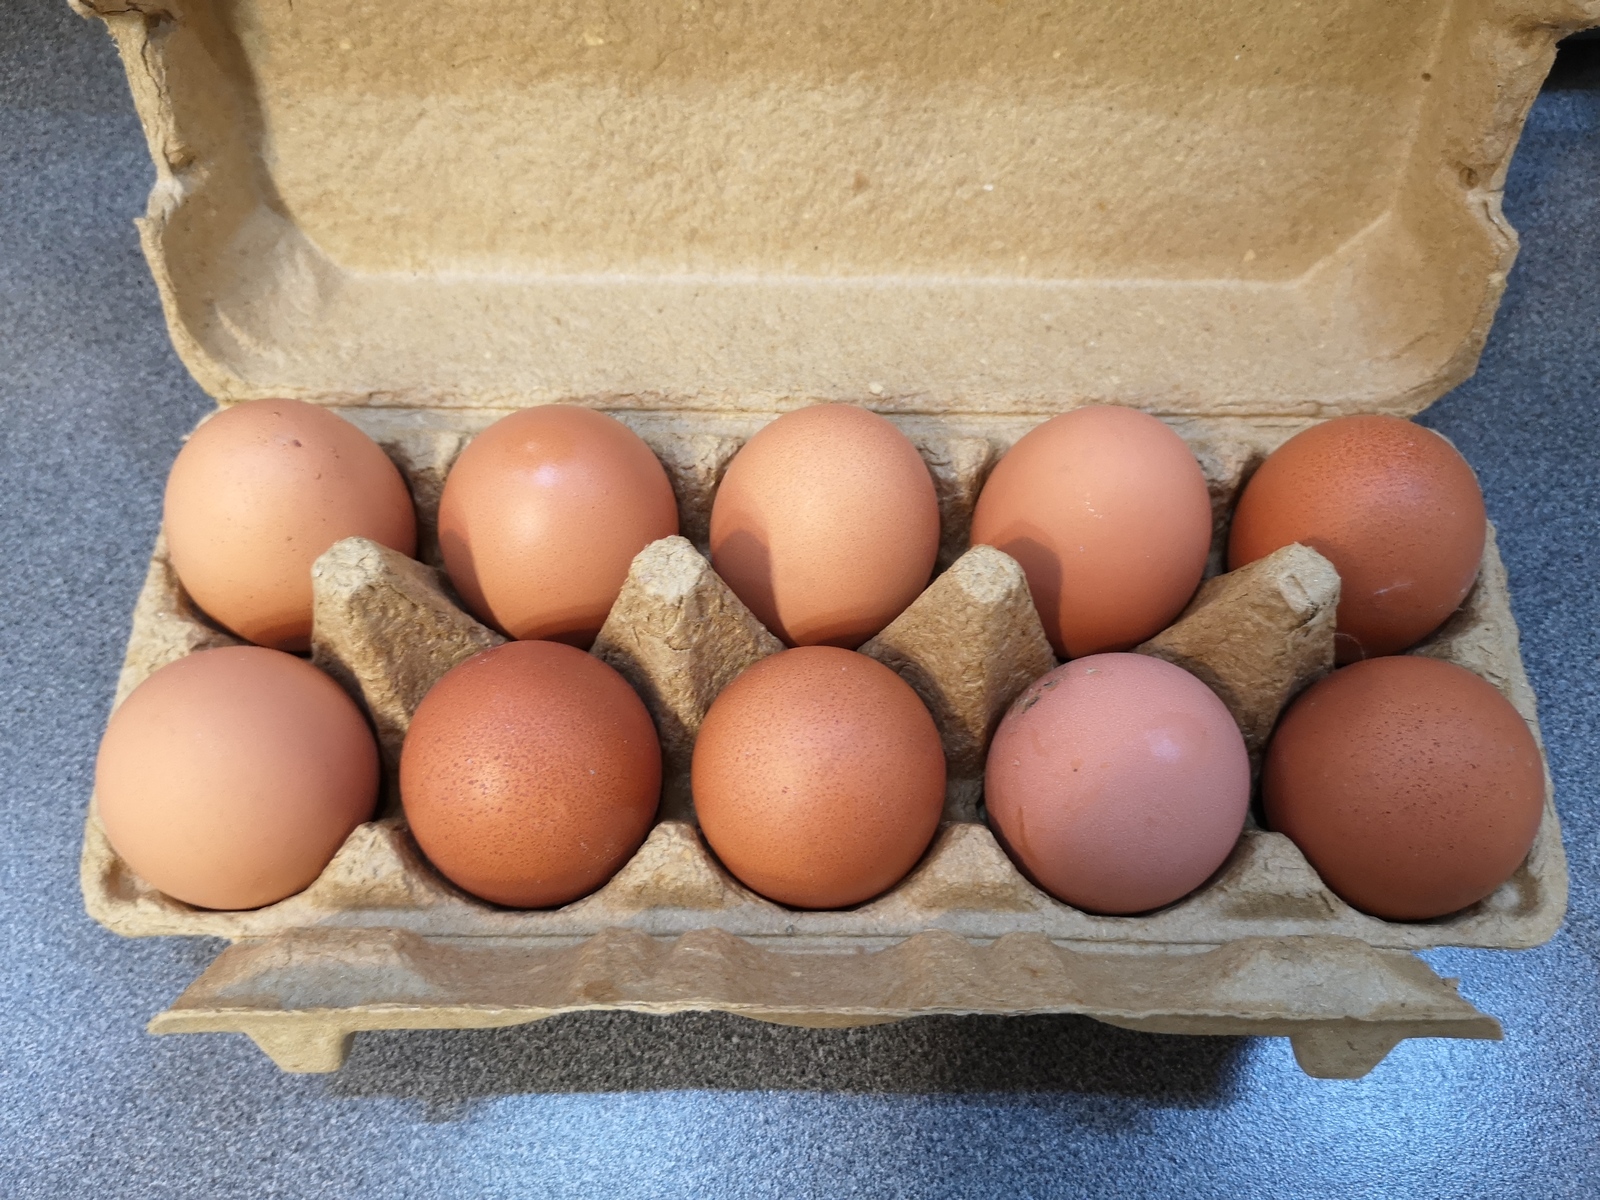 Who has more eggs? - My, Eggs, Deception, Longpost, Poor quality, Consumer rights Protection